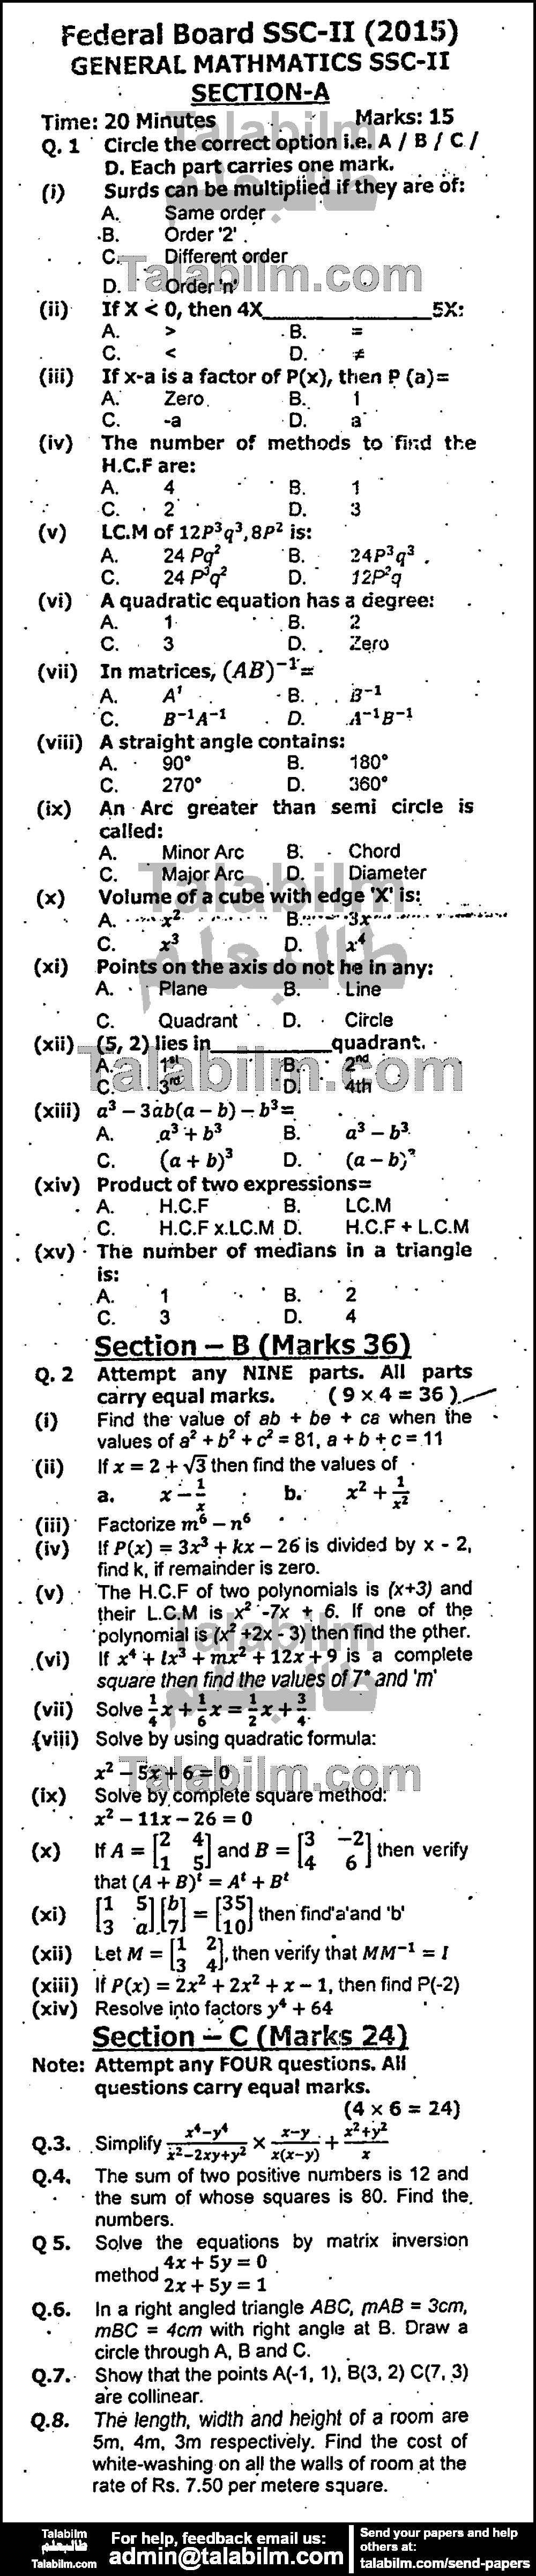 General Math 0 past paper for 2015 Group-I